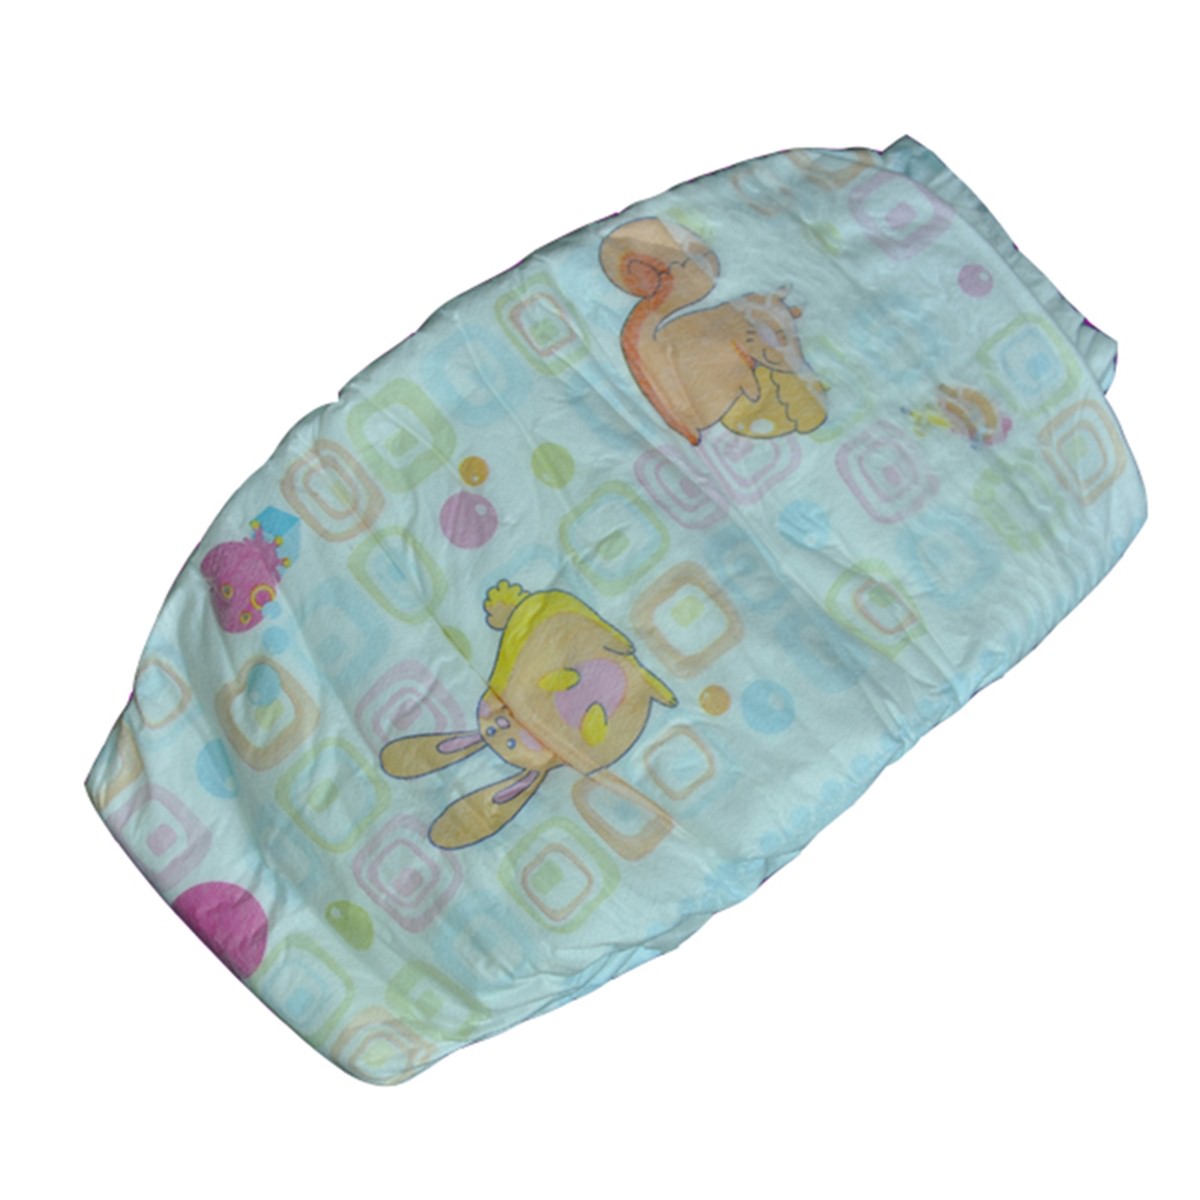 eco friendly disposable diapers